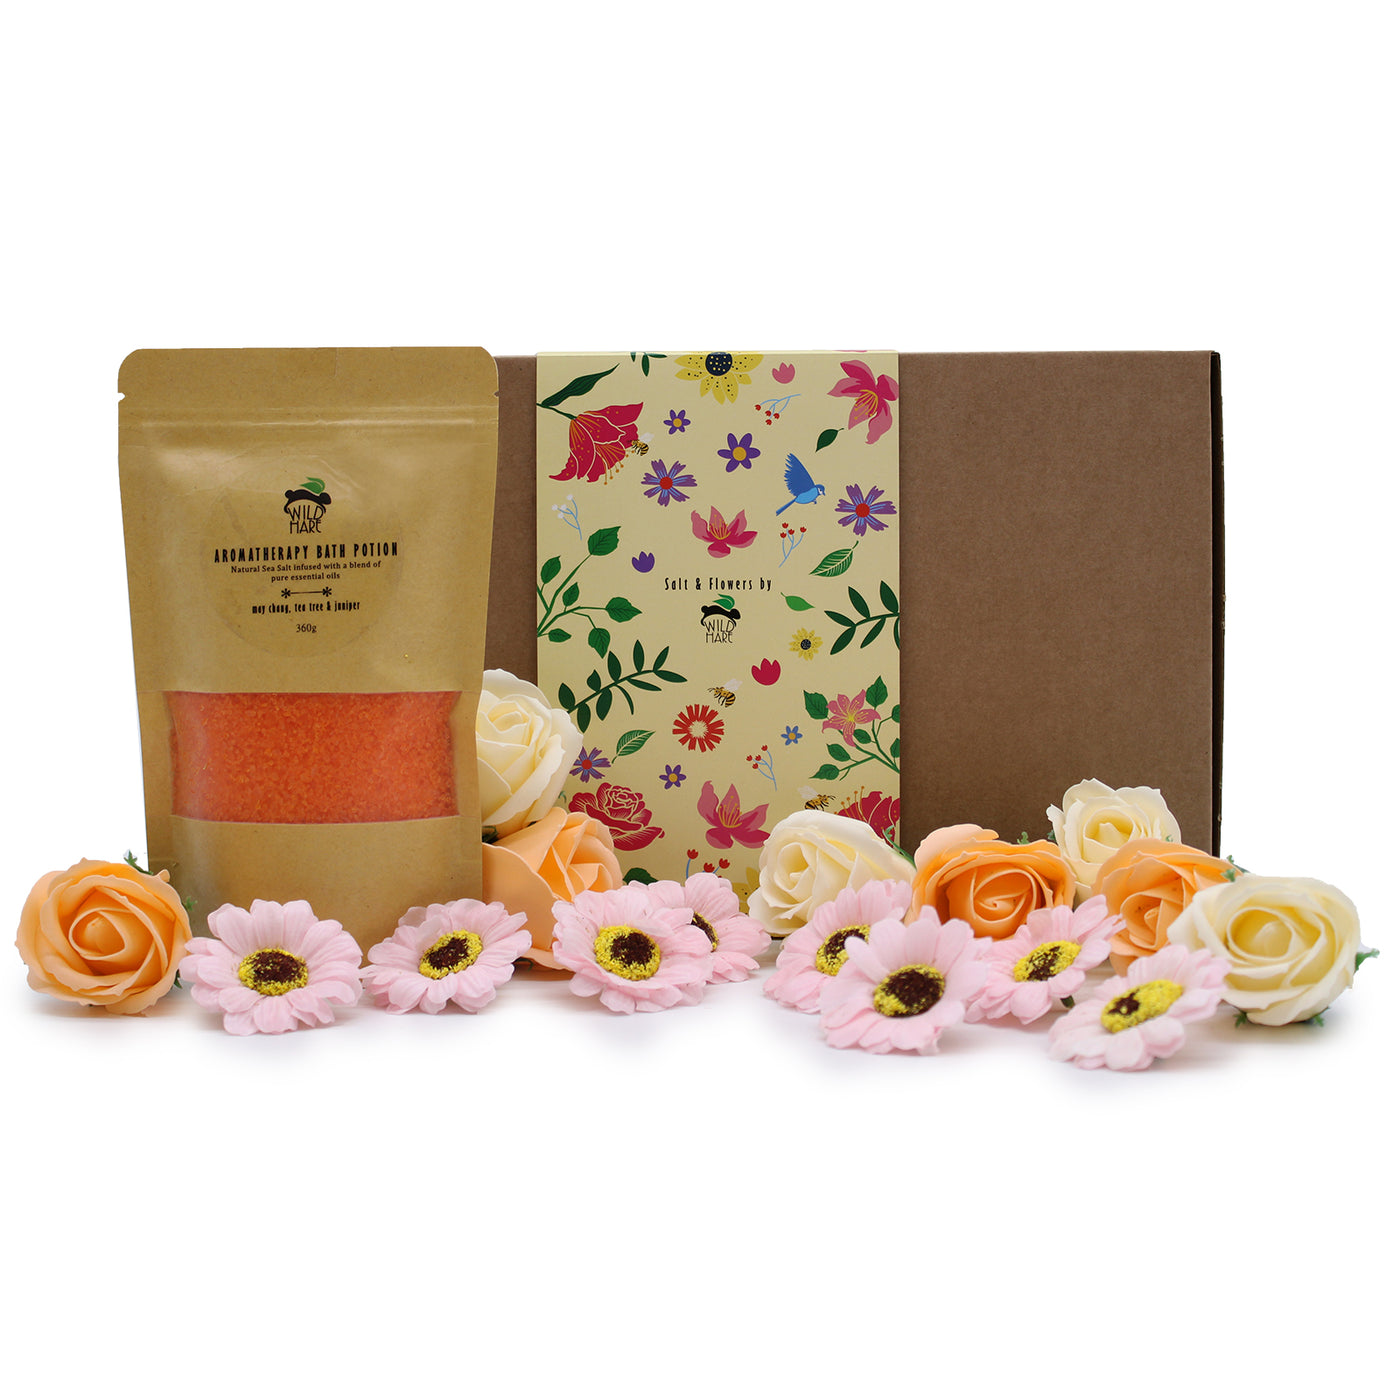 Salt Salt & Bath Flowers Bath Gift Sets With Pink Sunflowers And Yellow And Orange Roses.